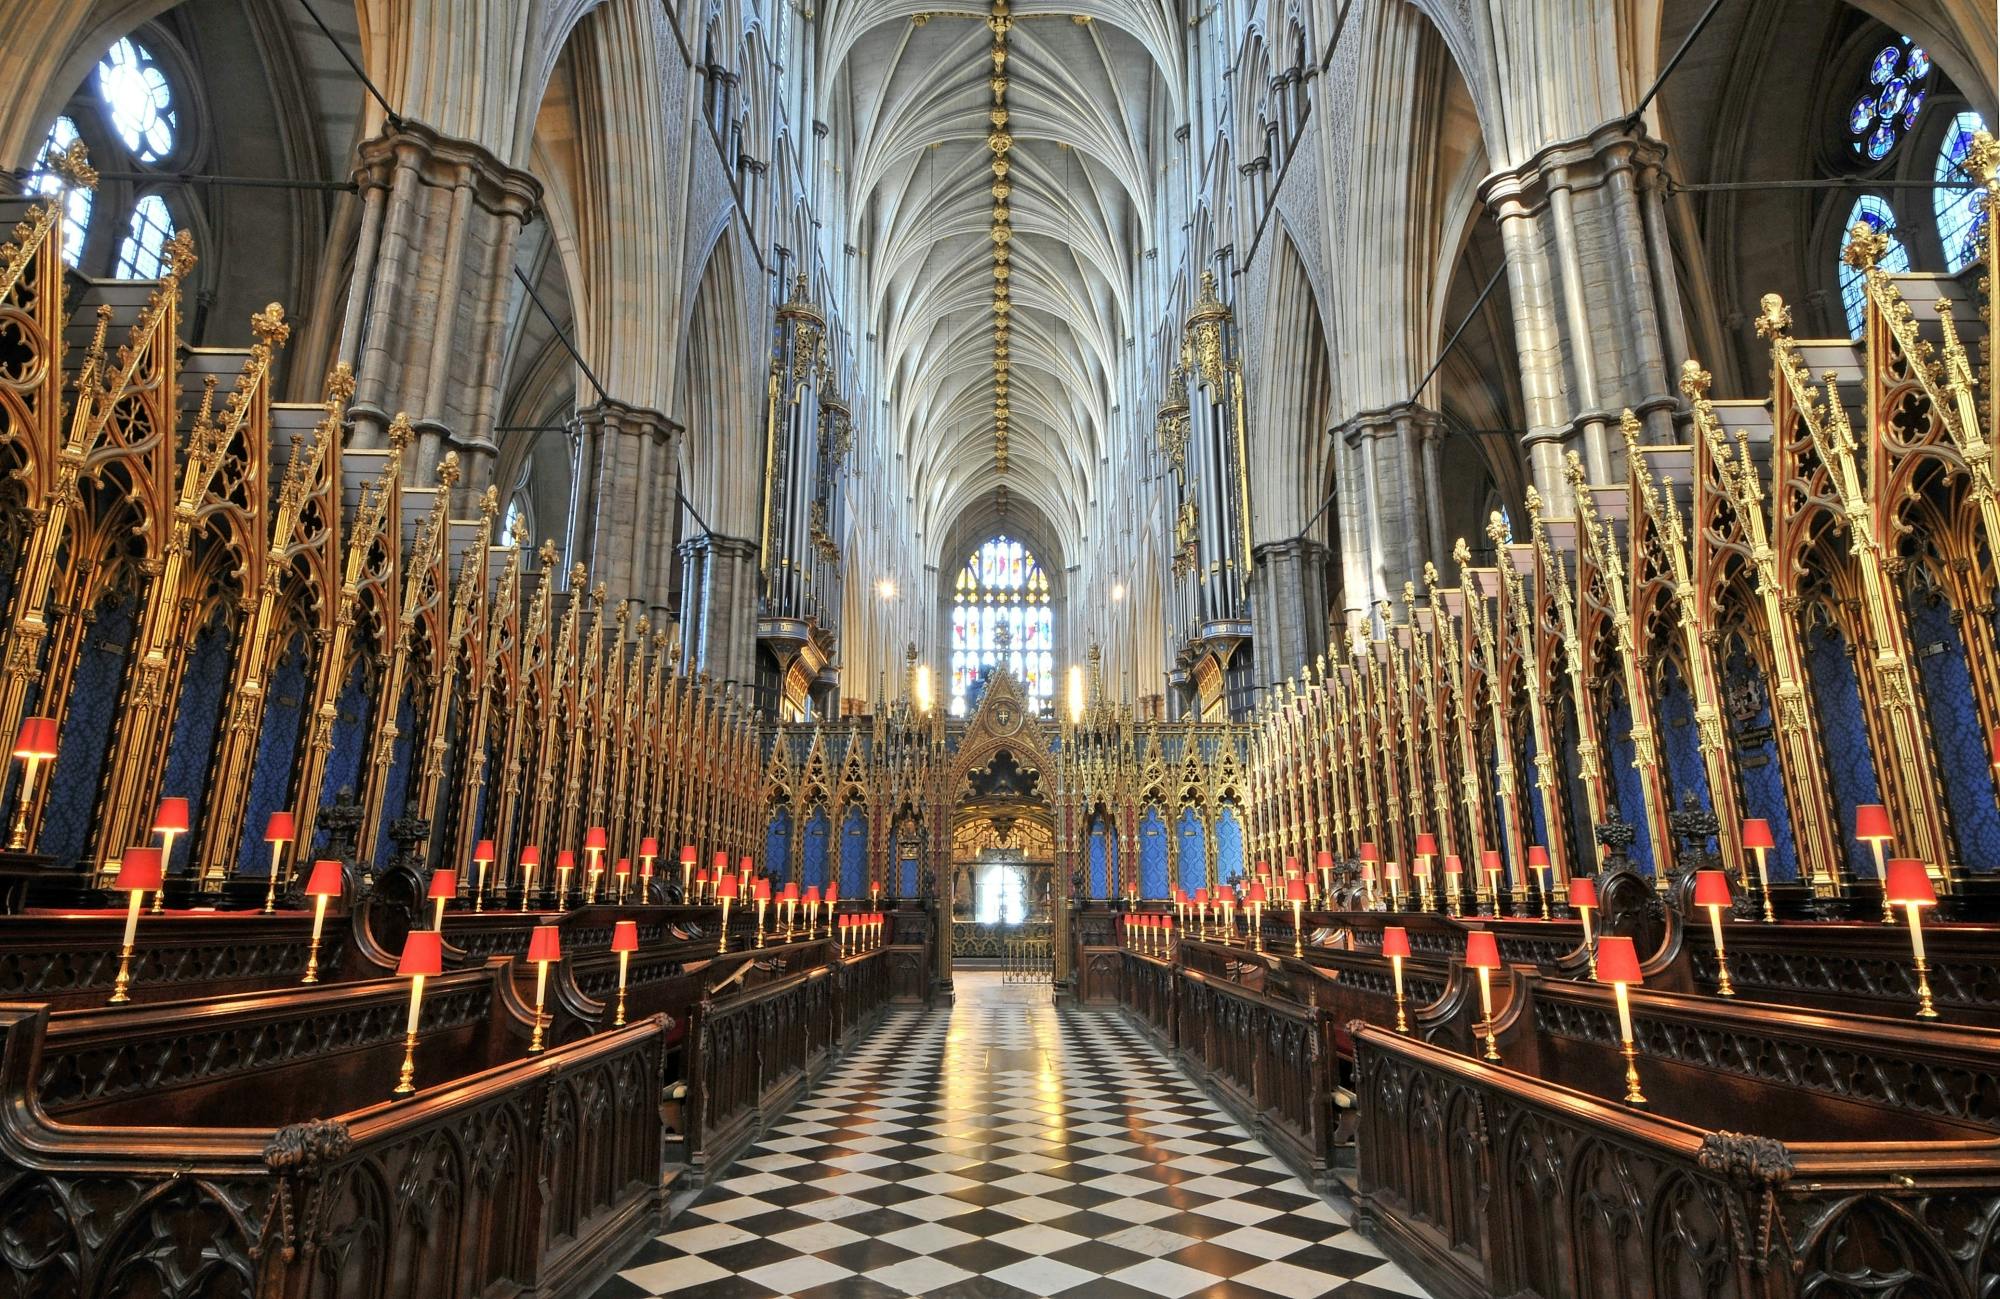 London top sights tour with Westminster Abbey and Churchill War Rooms